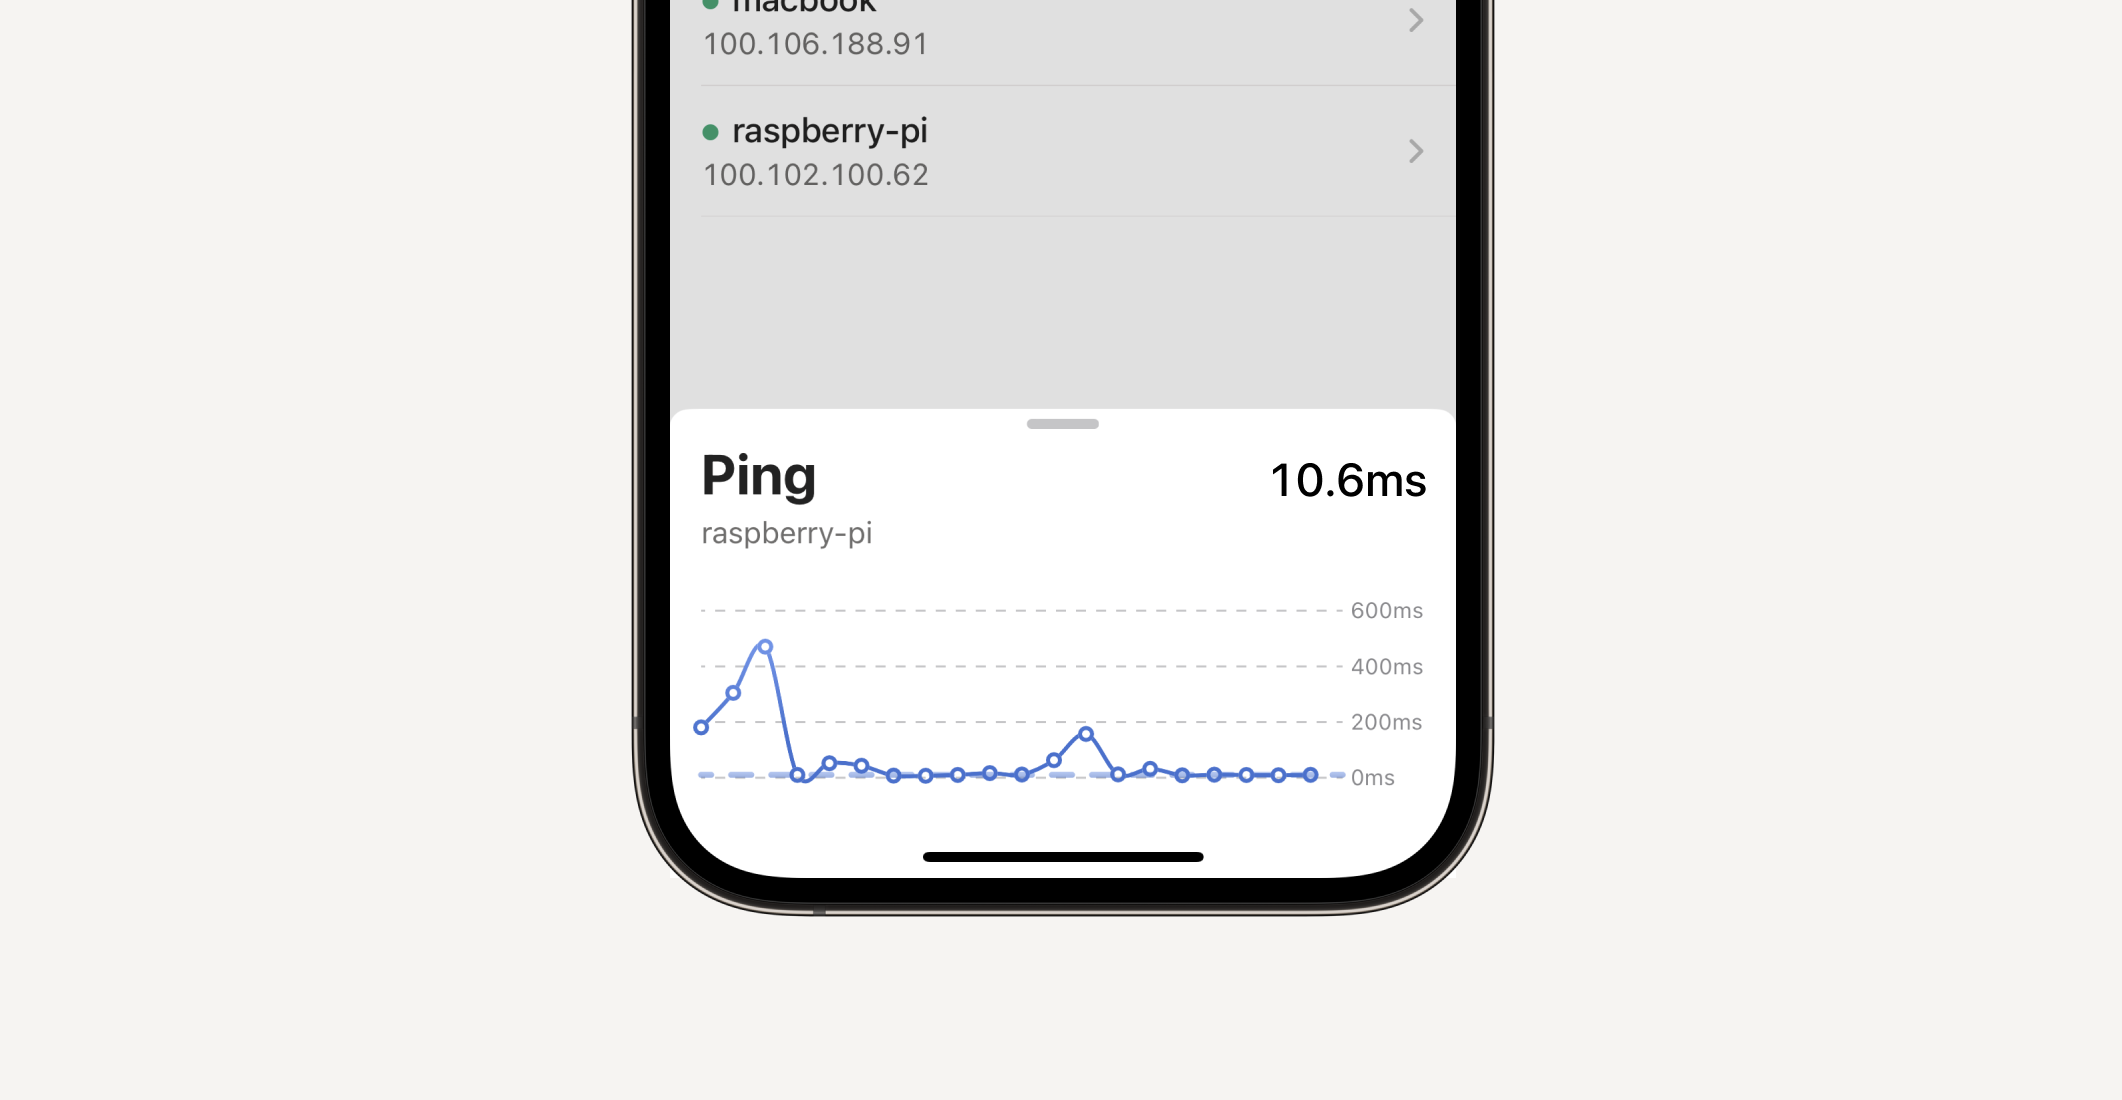 The card that shows ping information in the Tailscale iOS app